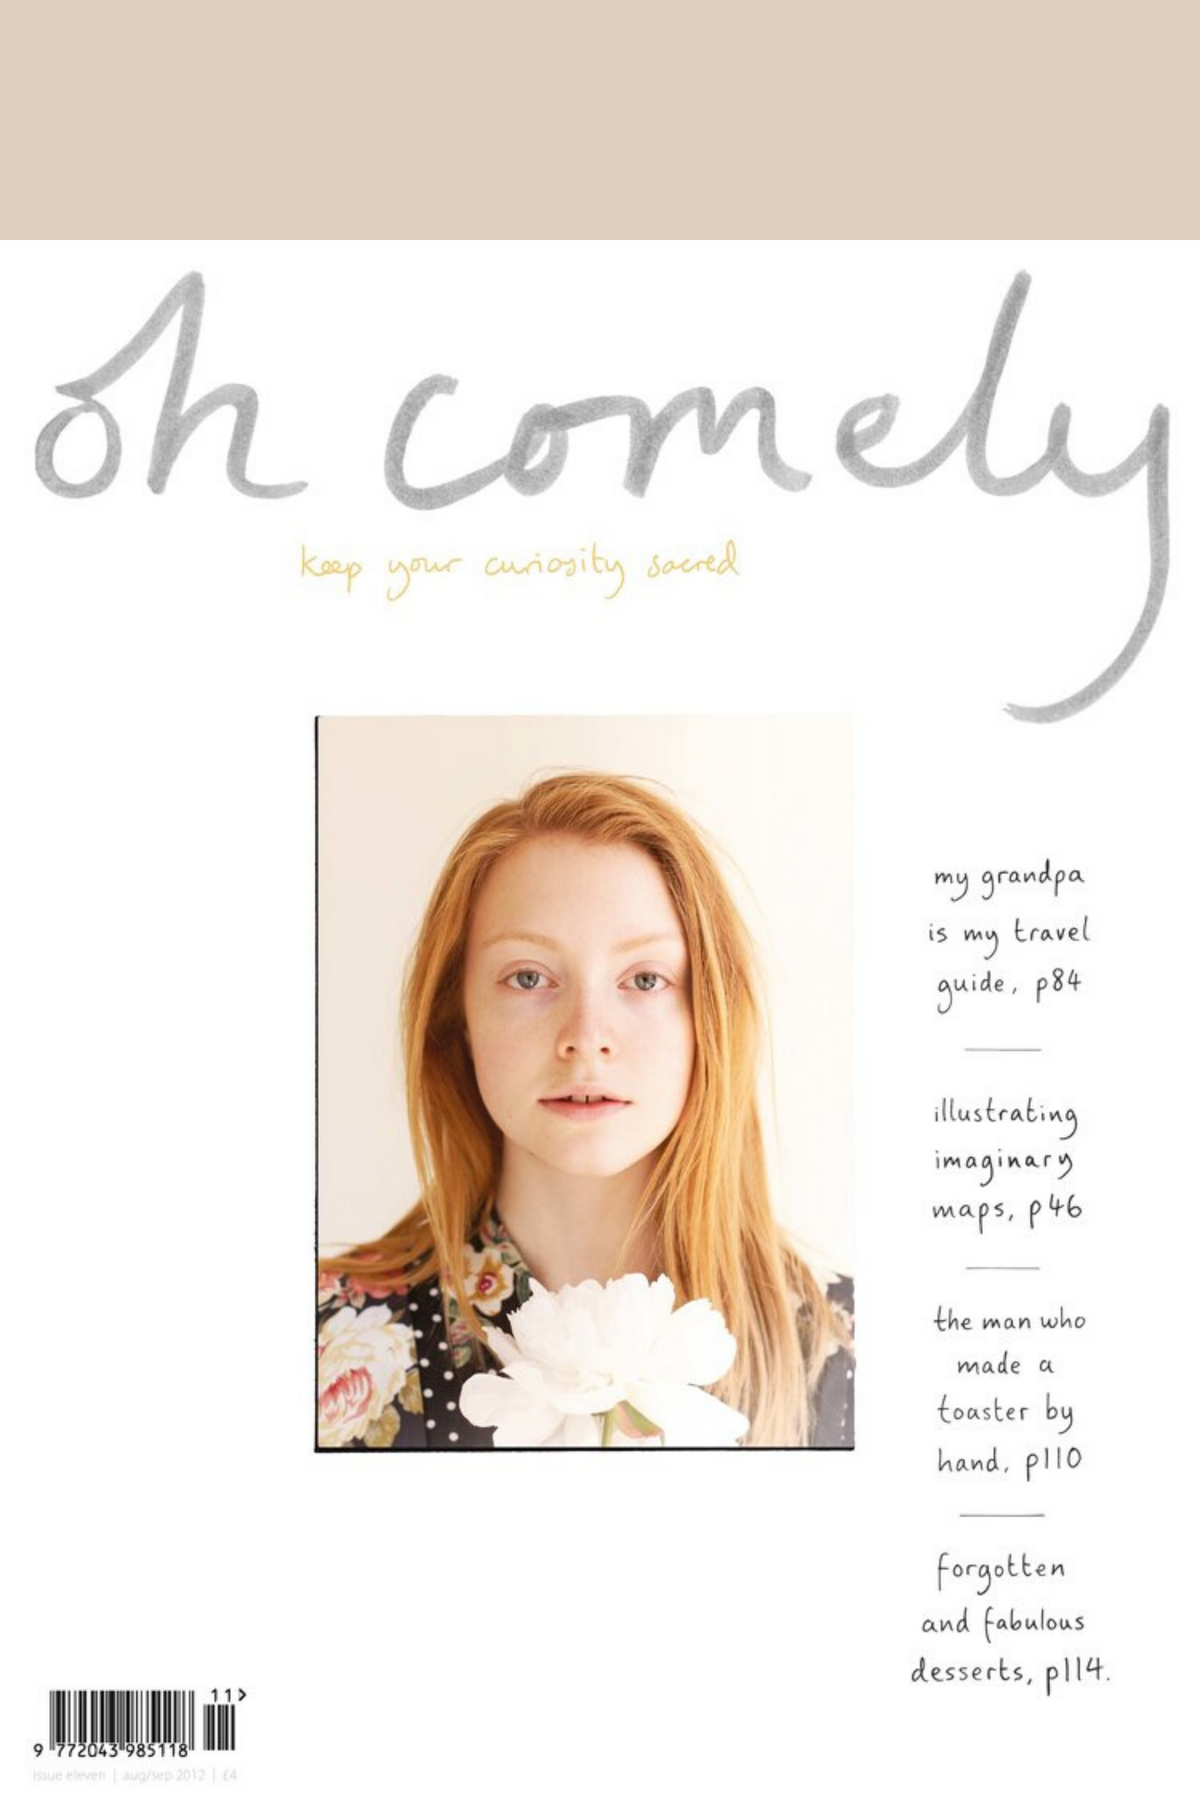 Oh Comely - Issue 11